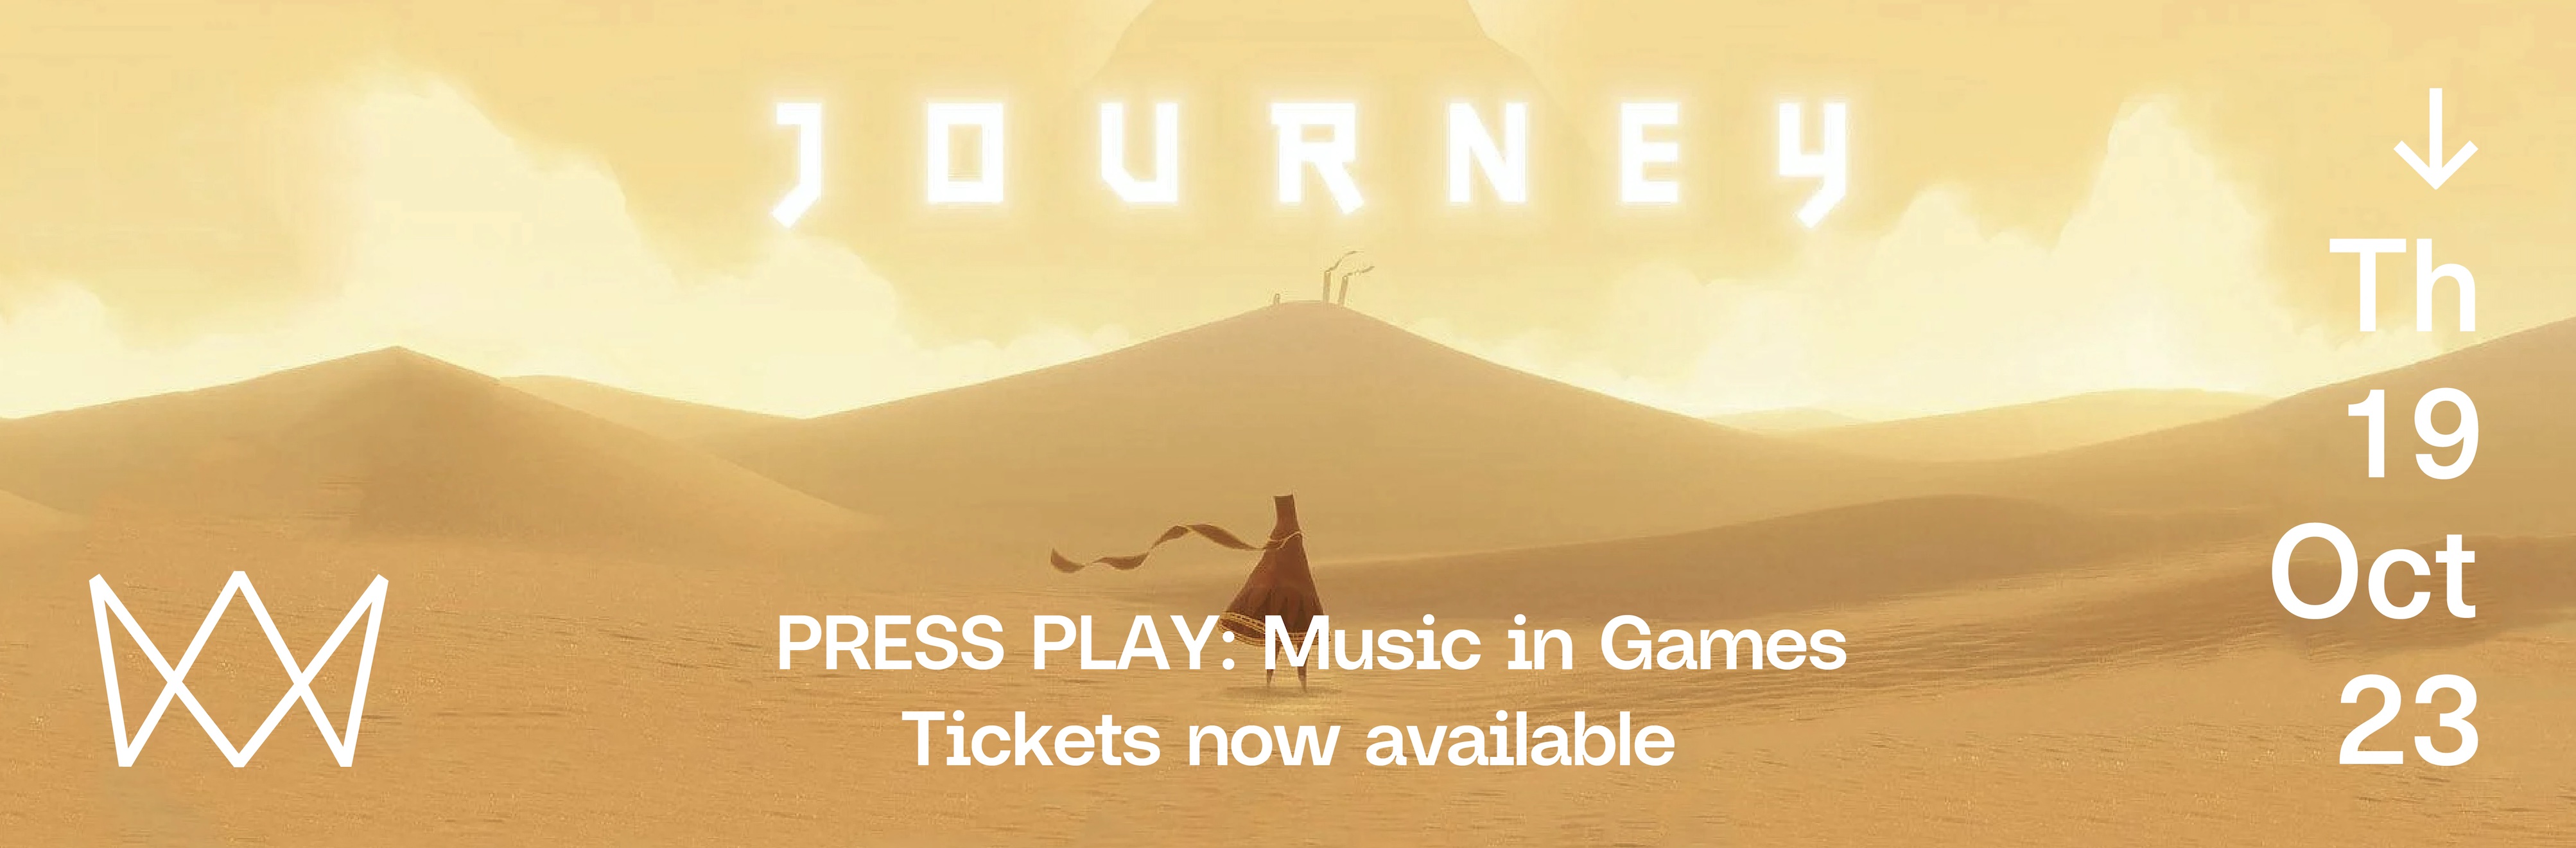 PRESS PLAY: Music in Games Concert 